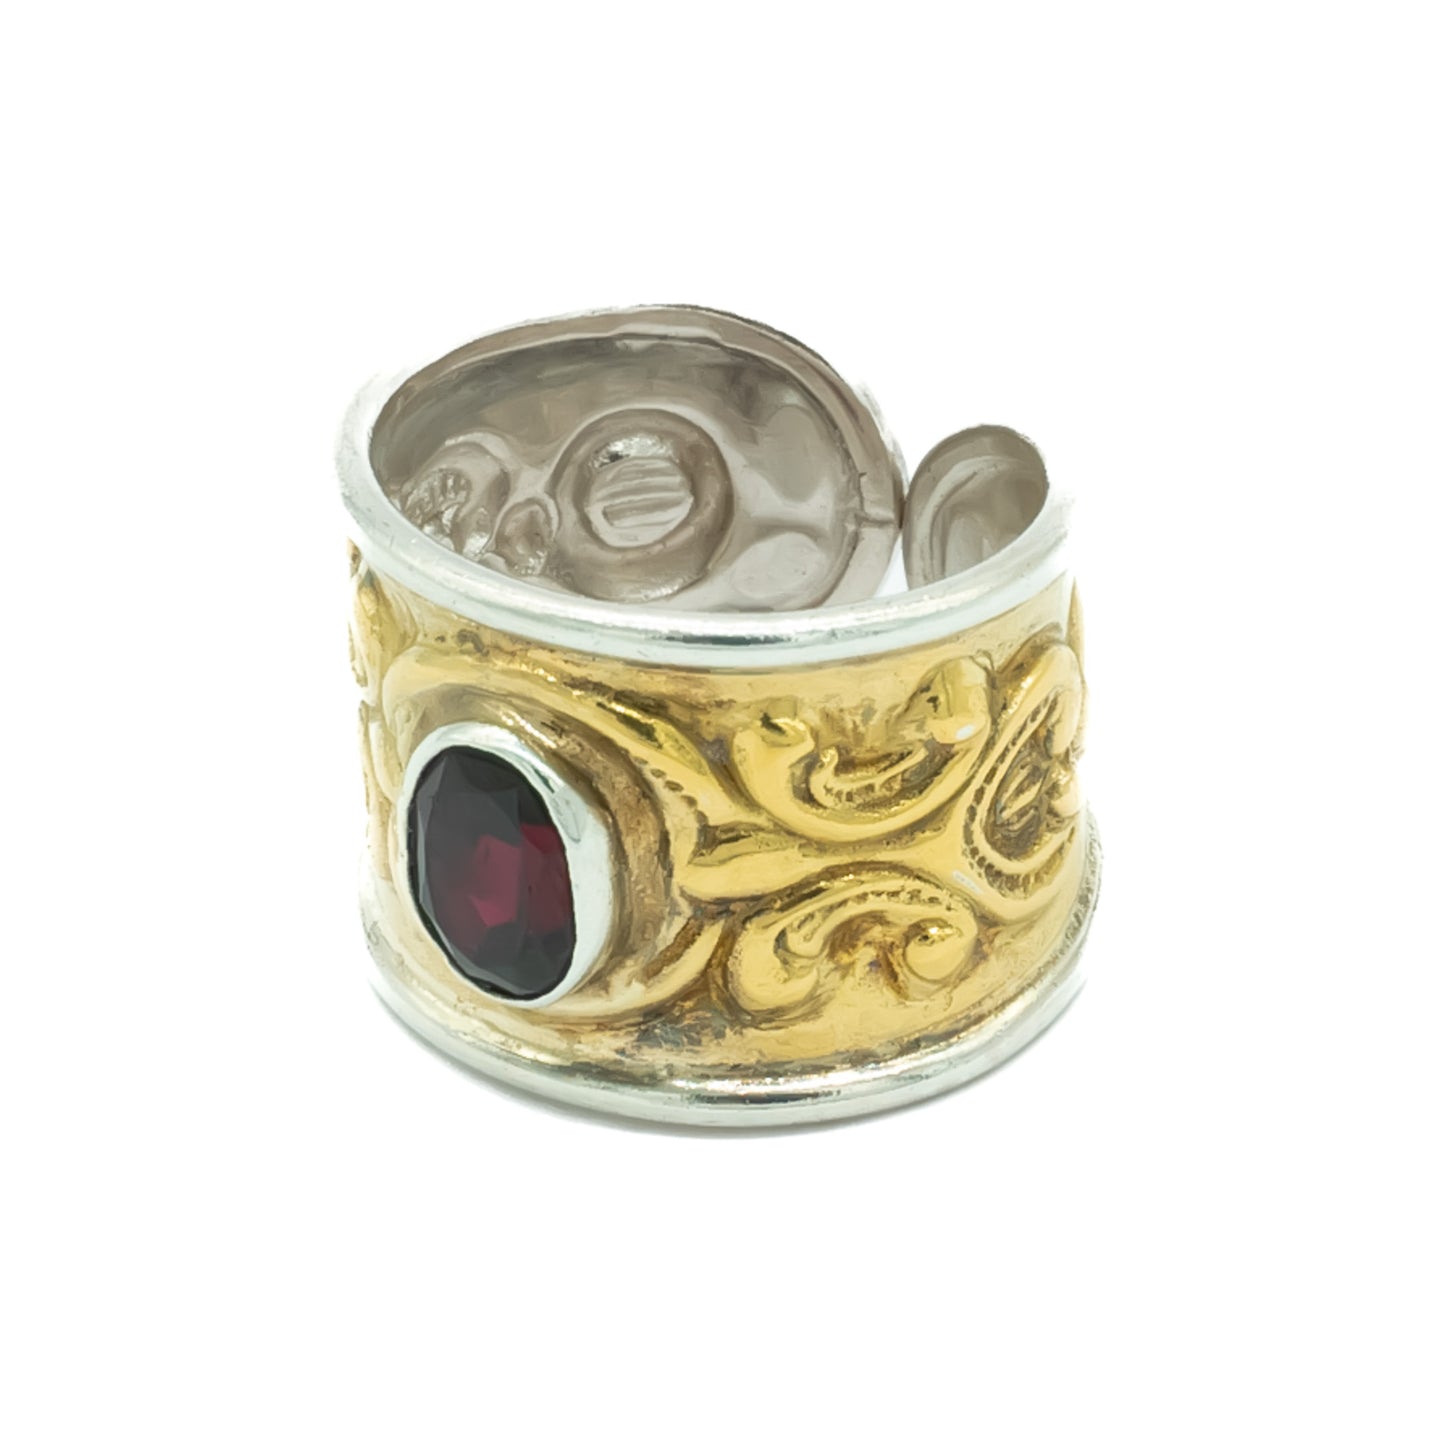 Gorgeous vintage 18ct yellow gold on silver repoussé band set with a deep red oval faceted garnet. Italy